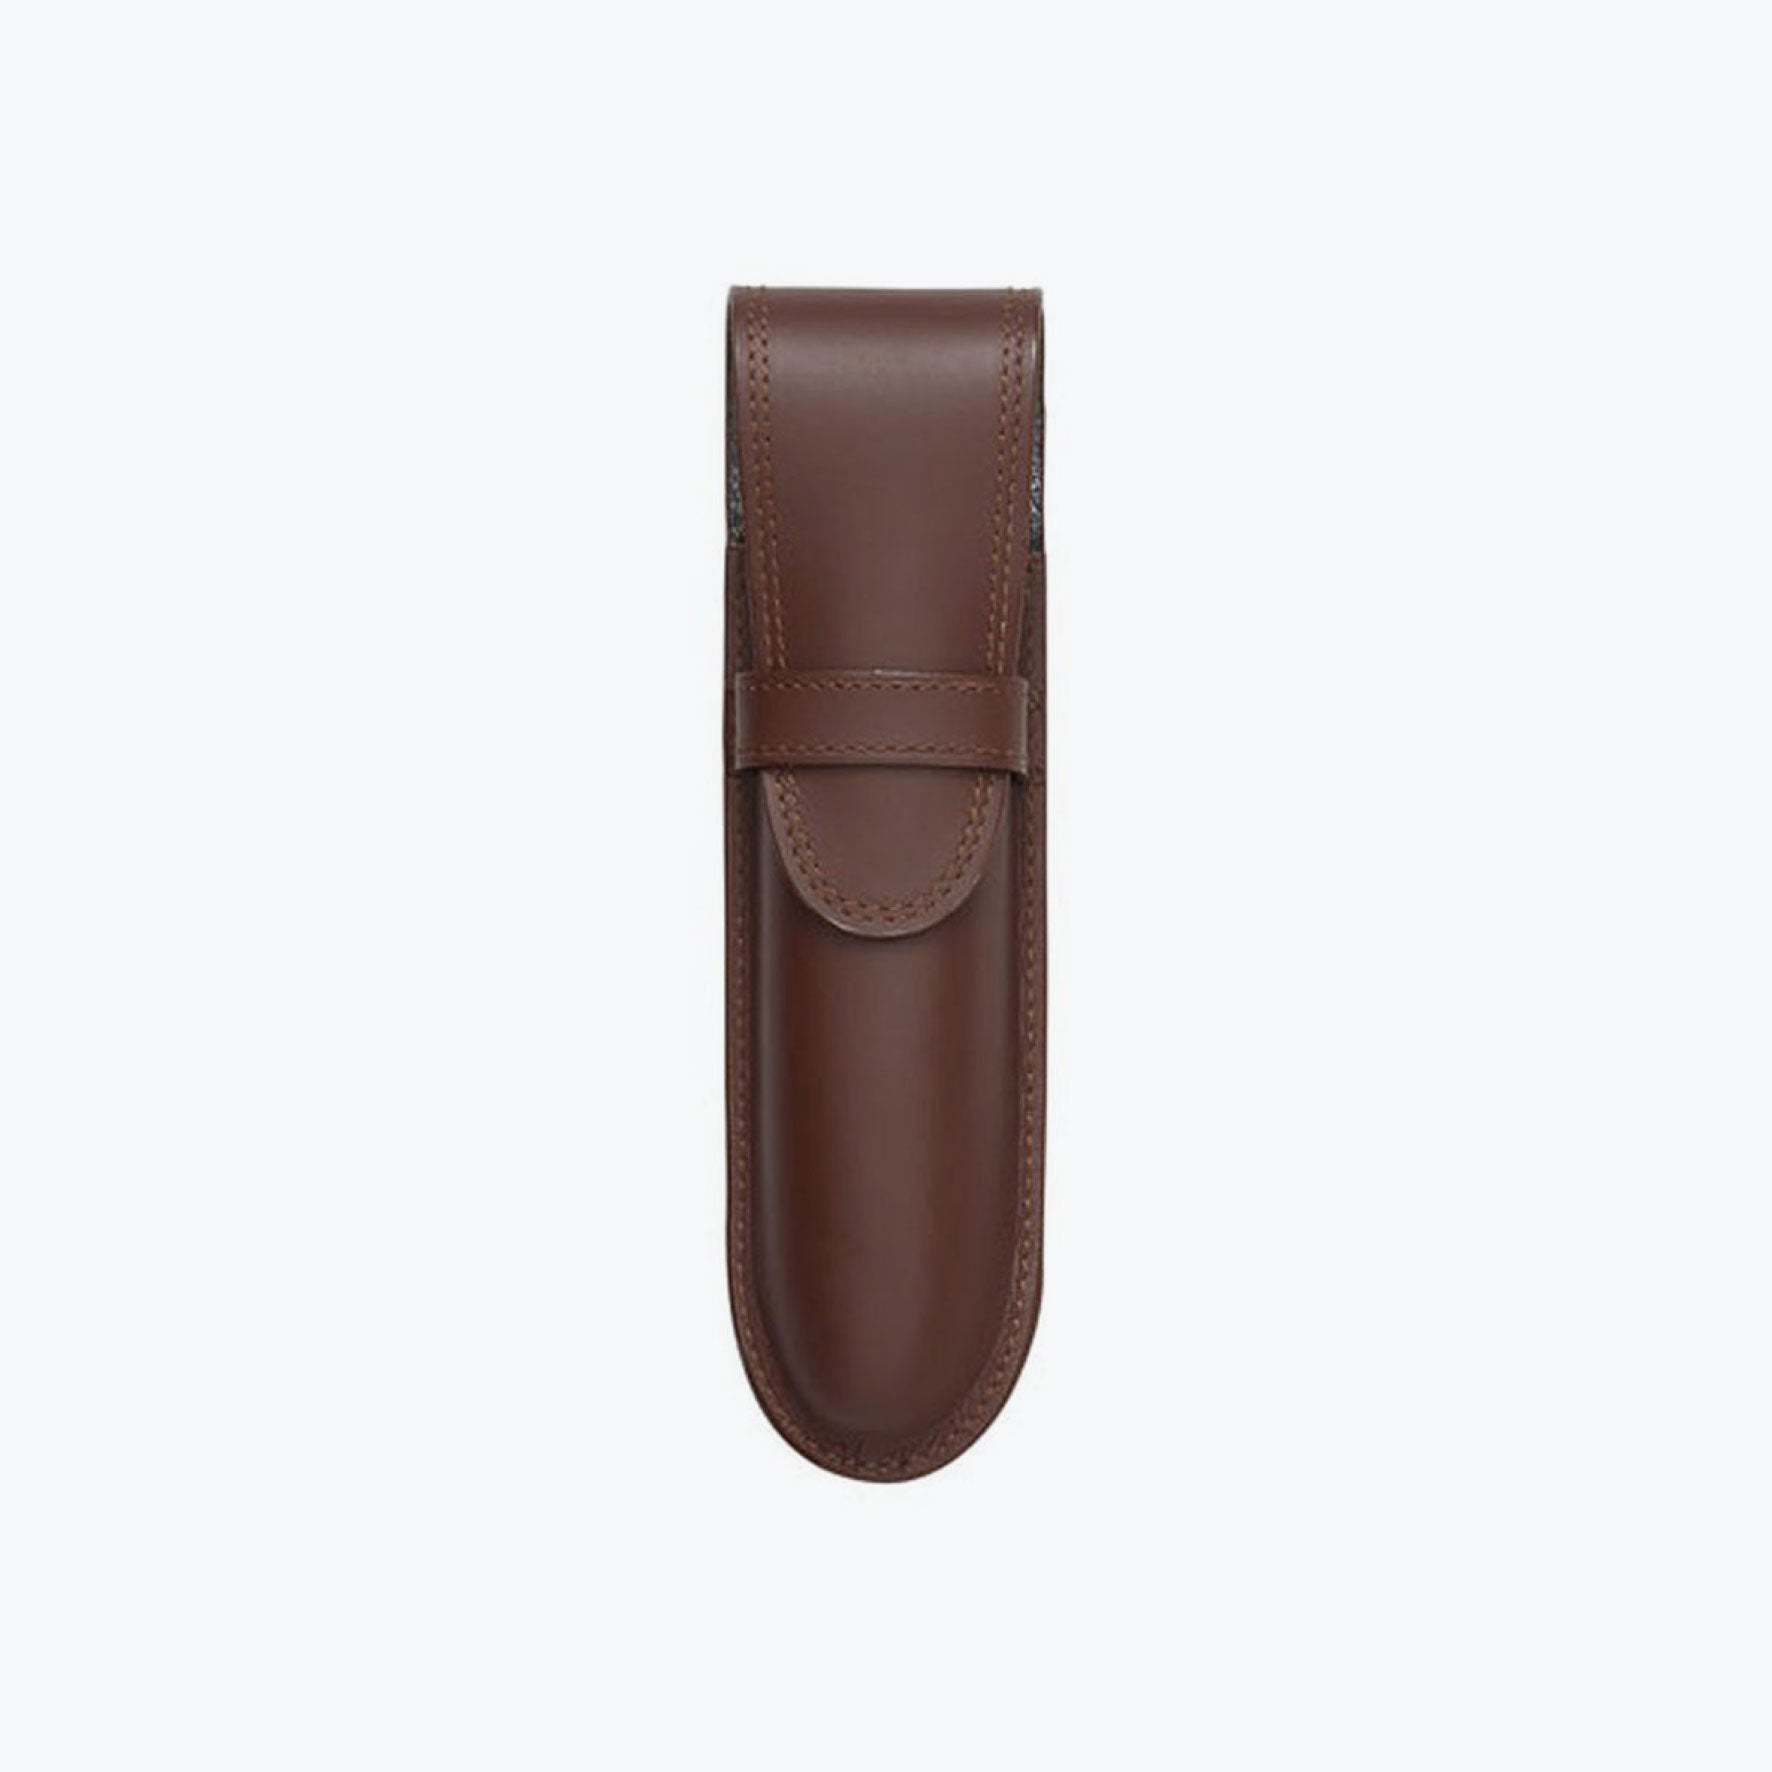 Pilot - Pen Pouch - Trender Leather - For Two - Dark Brown <Outgoing>